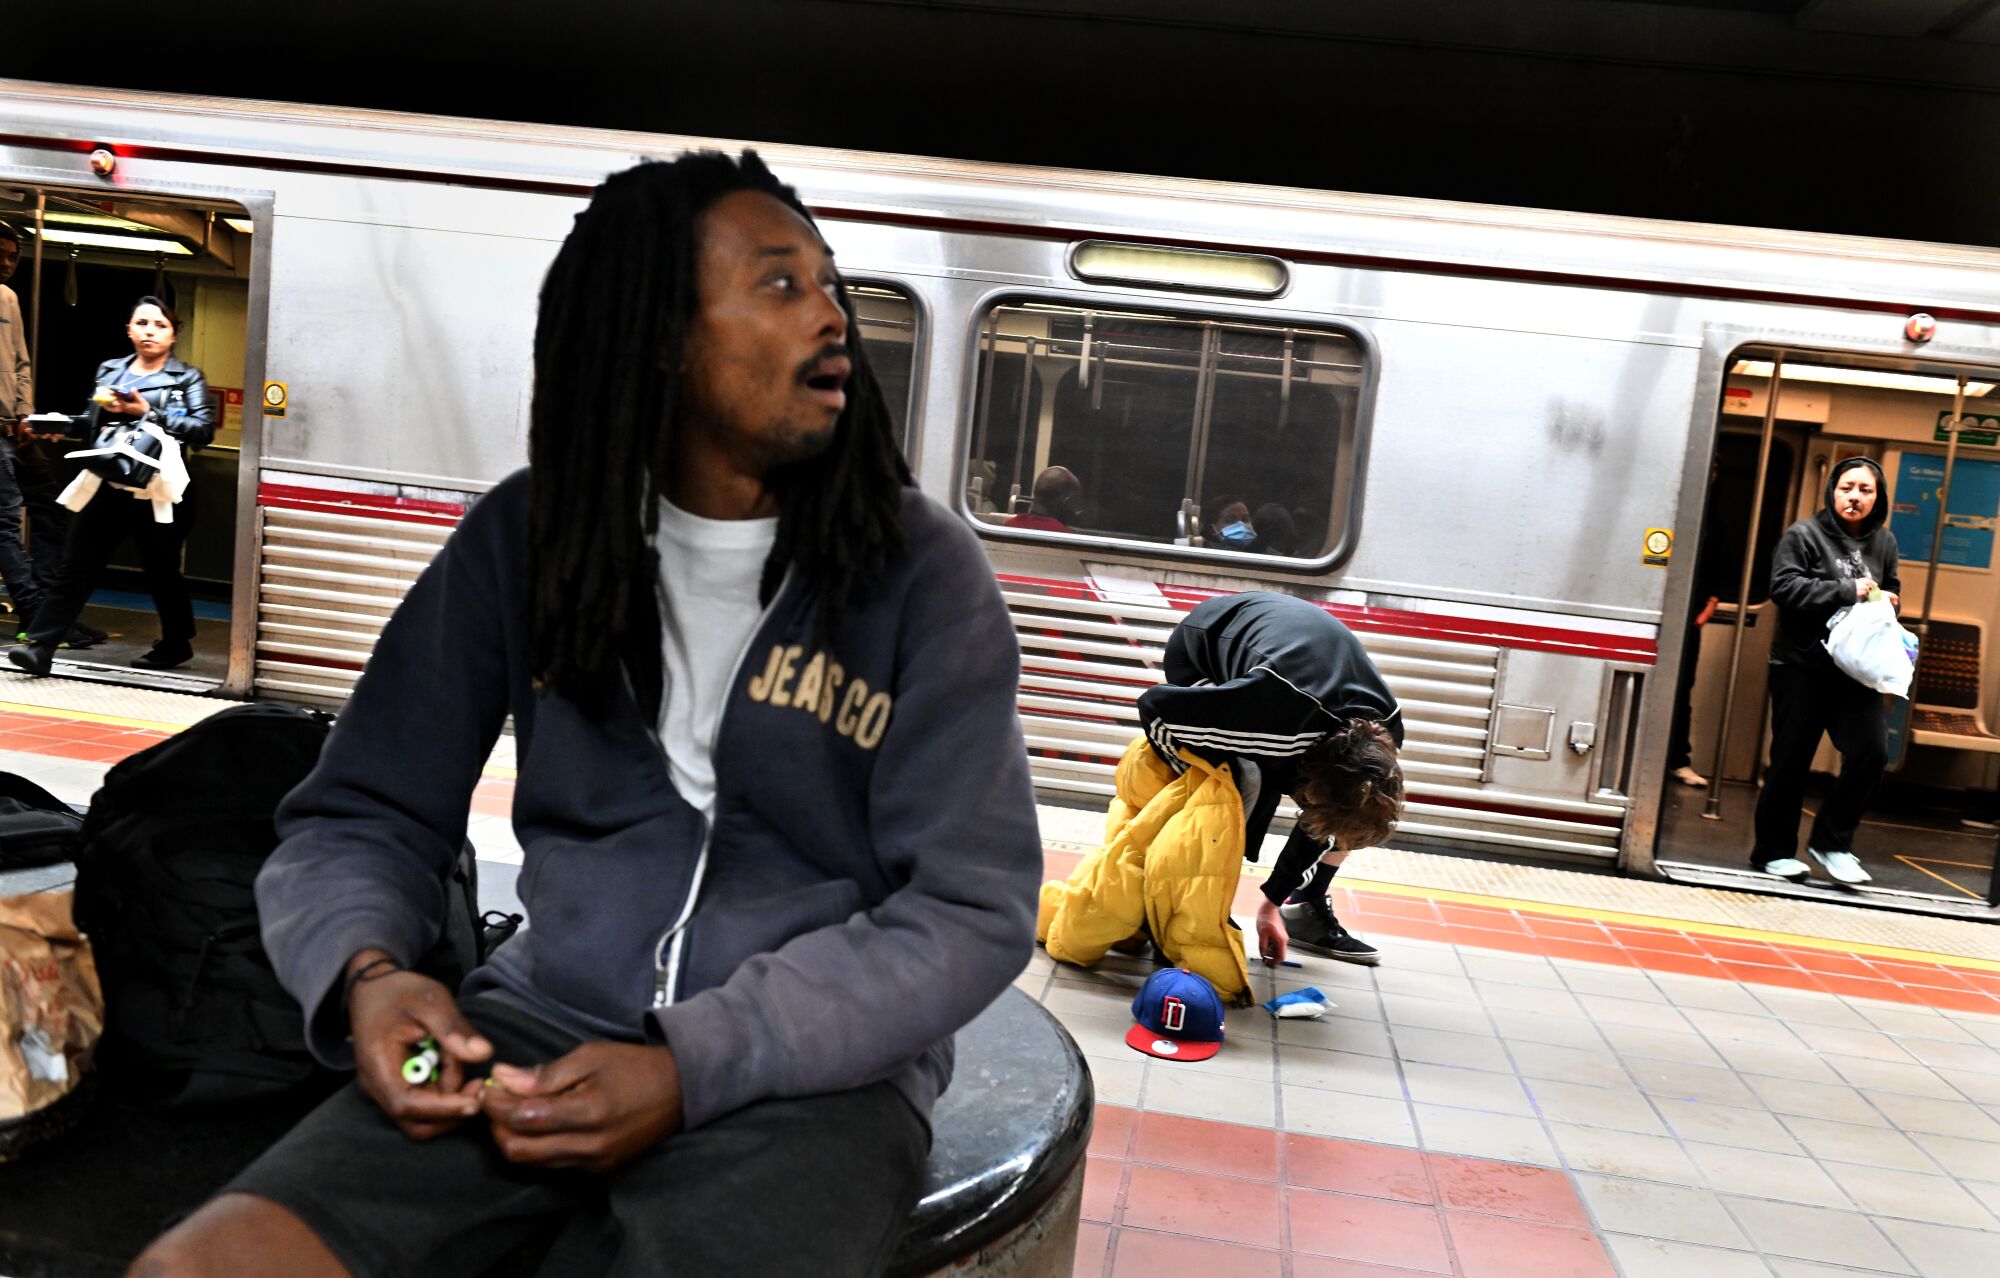 A man bends down and another one sits on a subway bench. A train with doors open is in the background with people exiting.